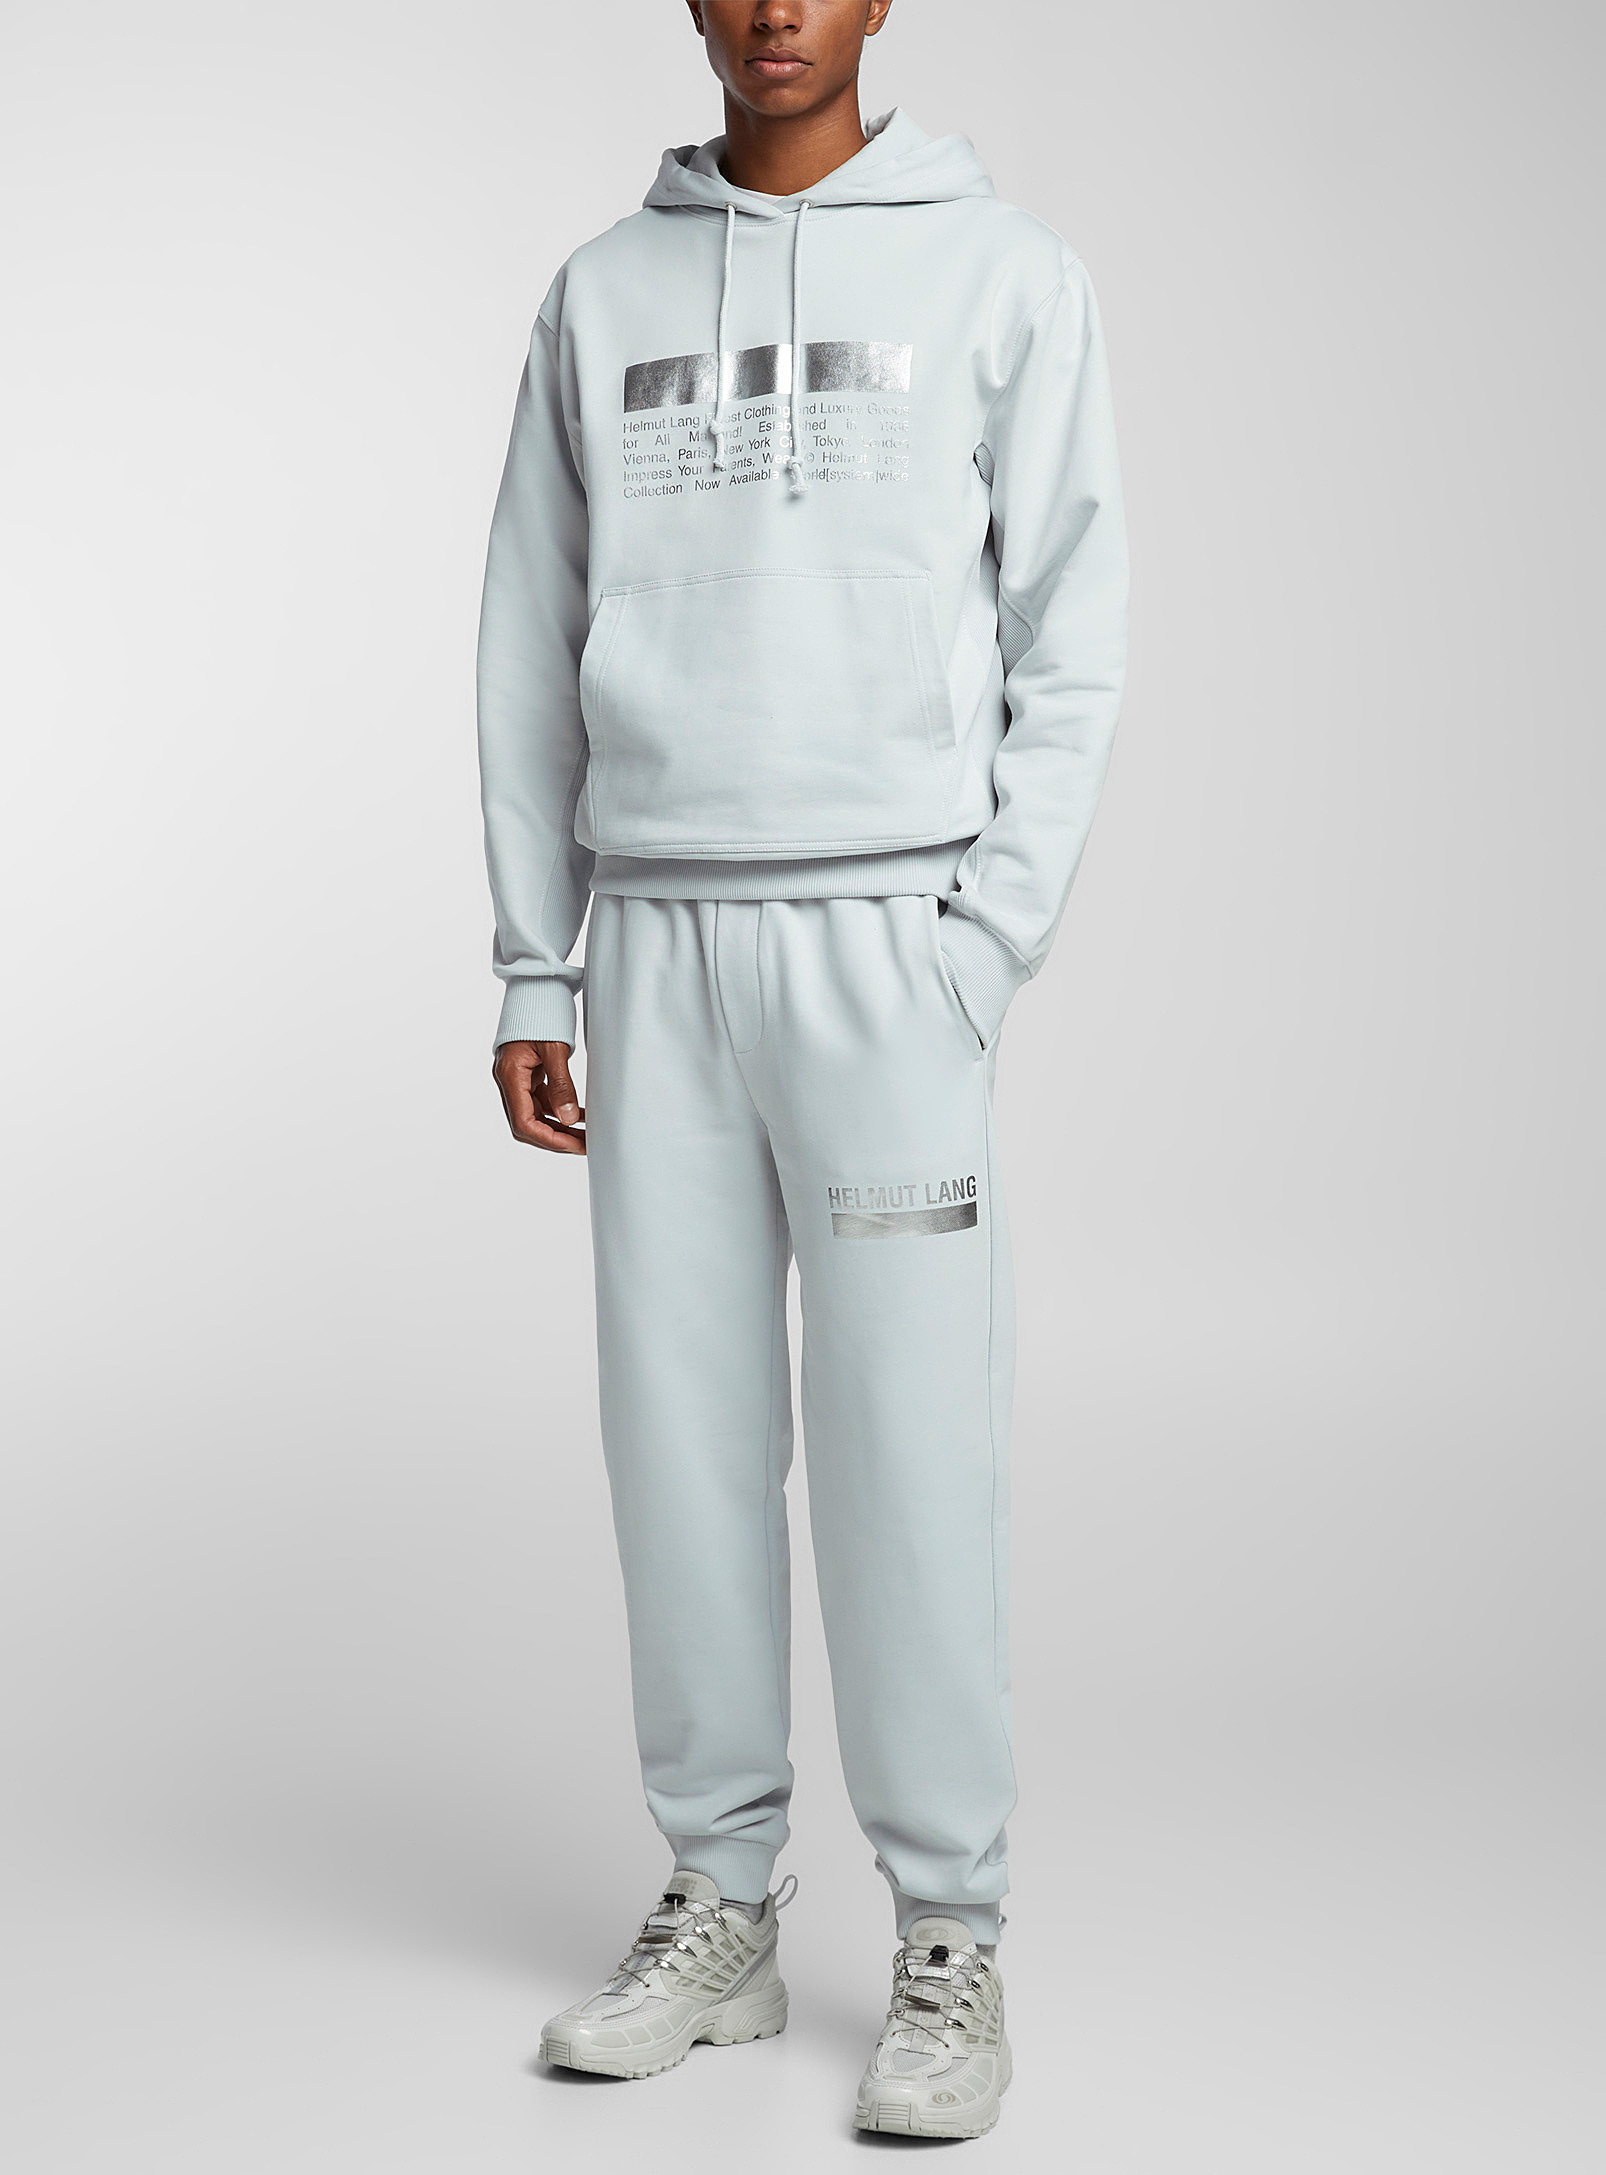 Helmut Lang - Men's Space silvery signature jogger